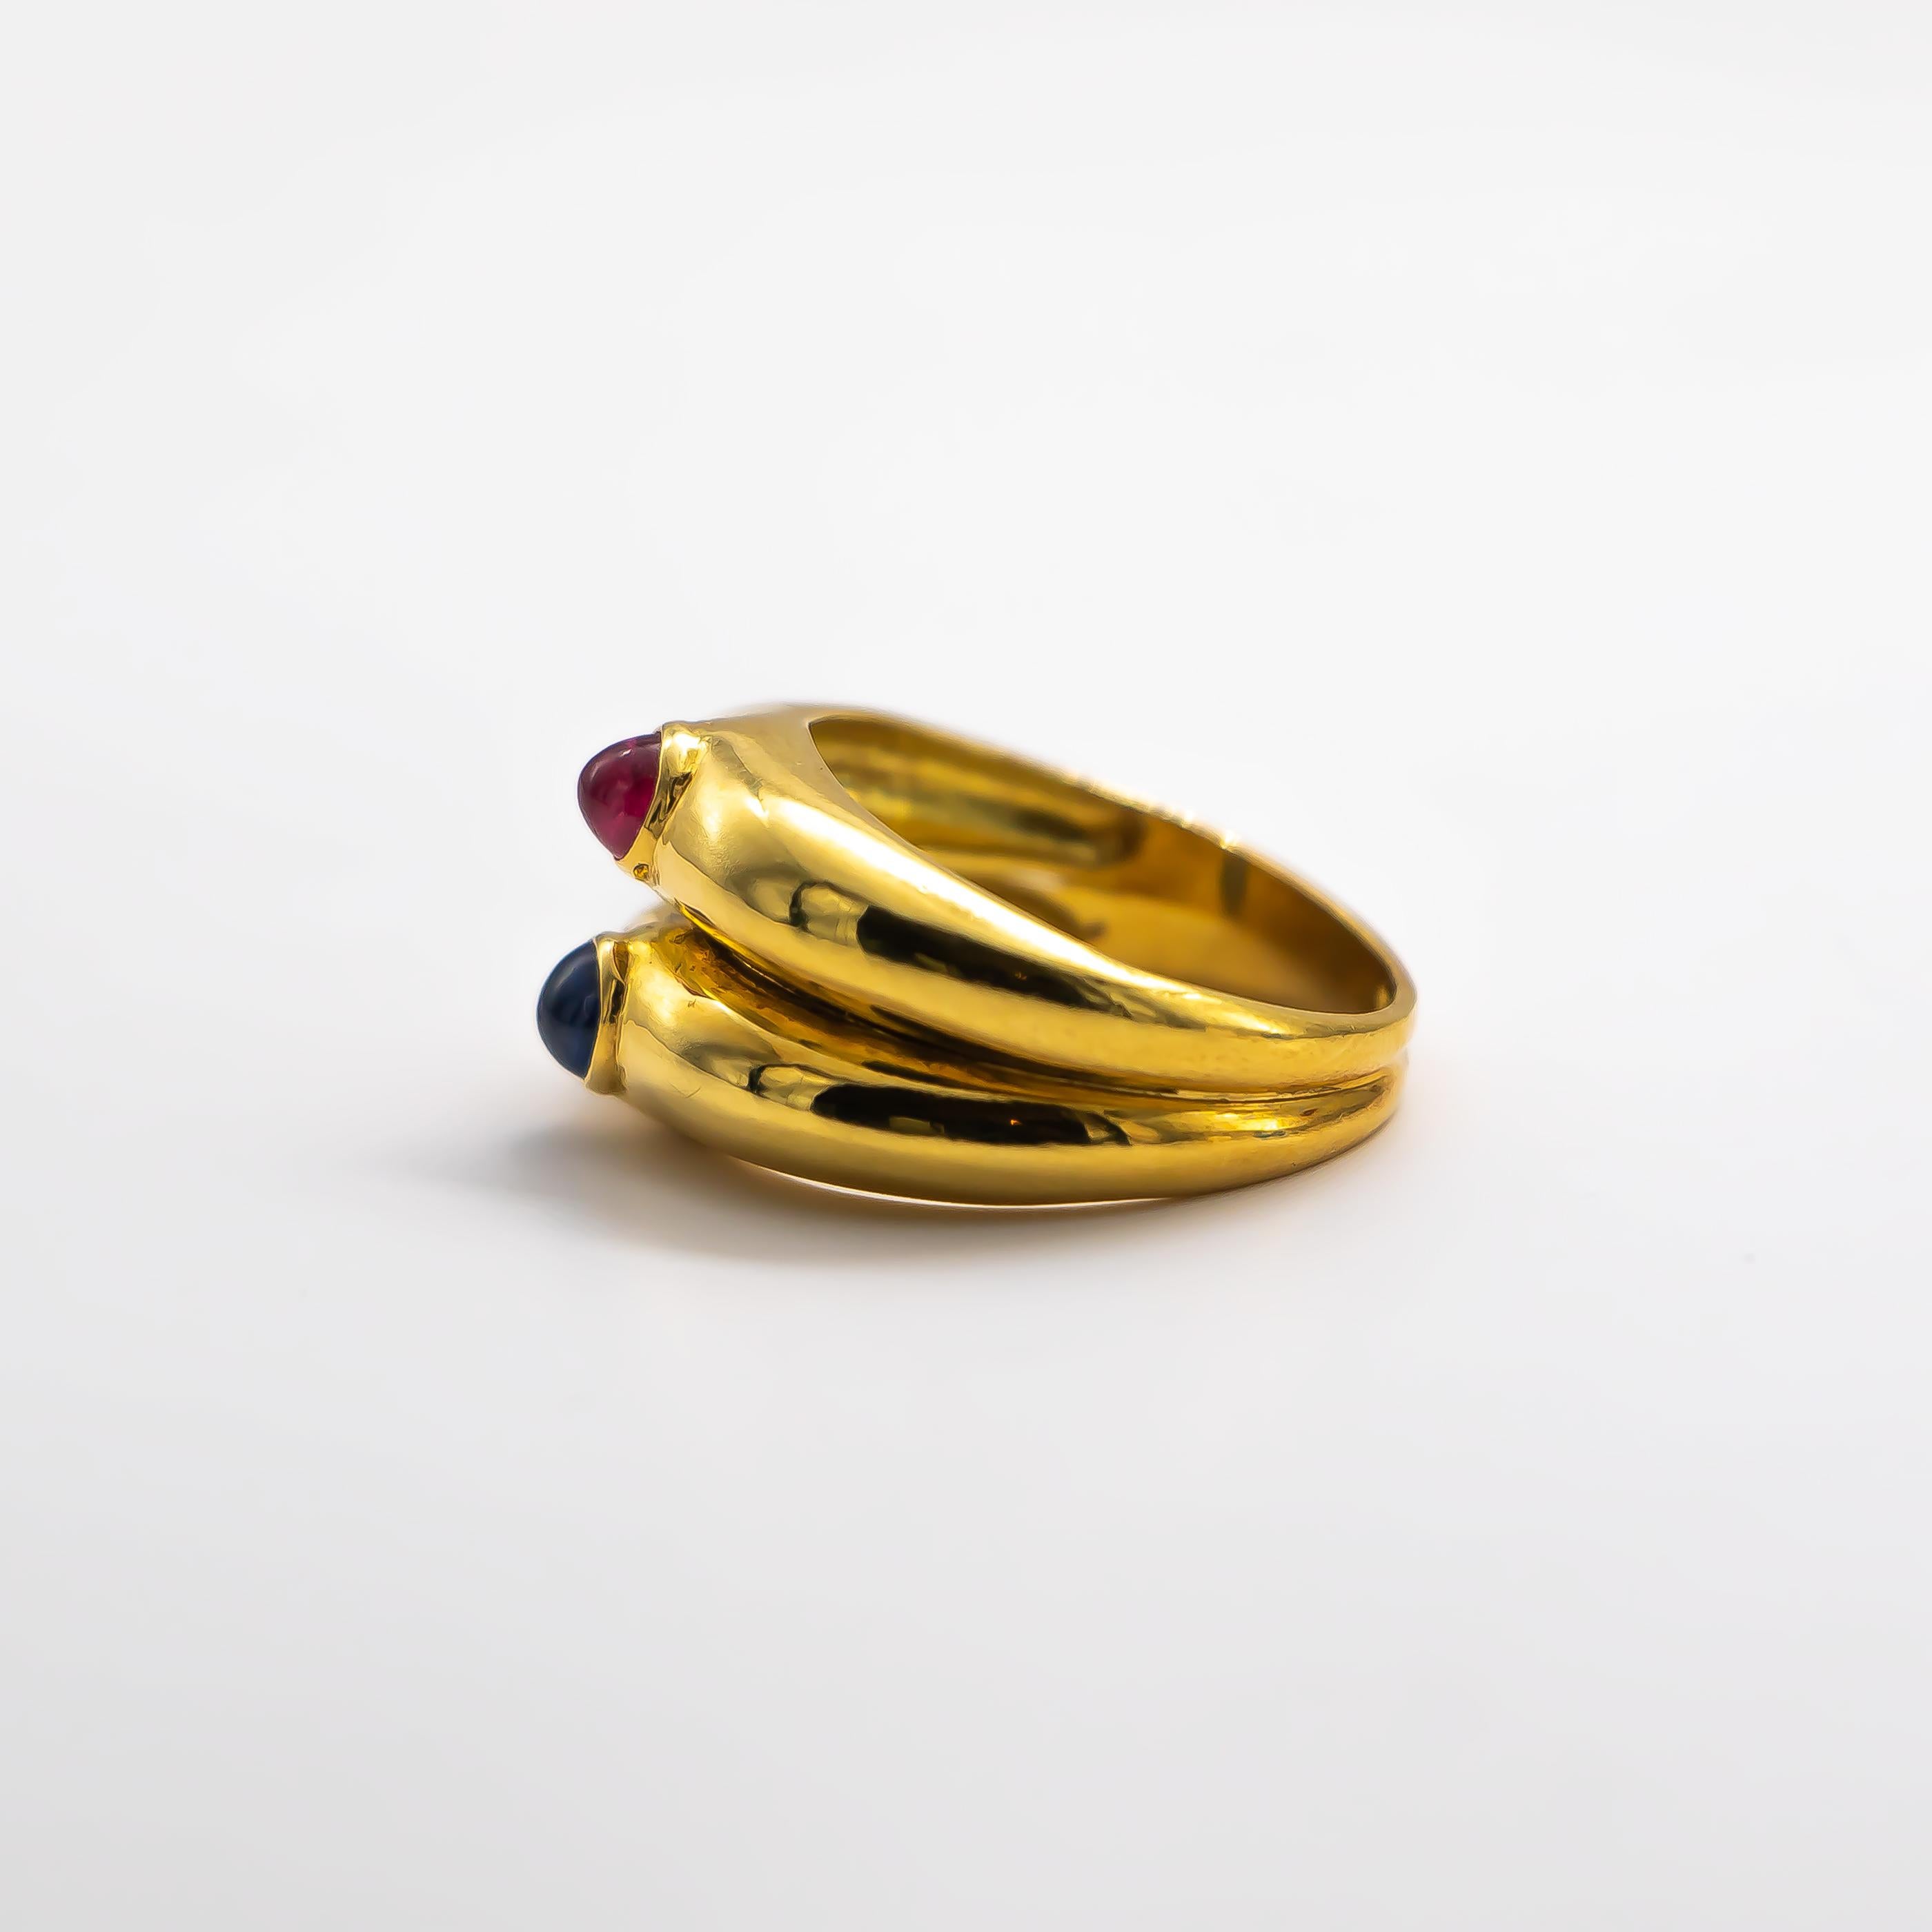 Cabochon 0.2 Carat Ruby and Cabochon 0.2 Carat Sapphire Ring 18K Yellow Gold 4